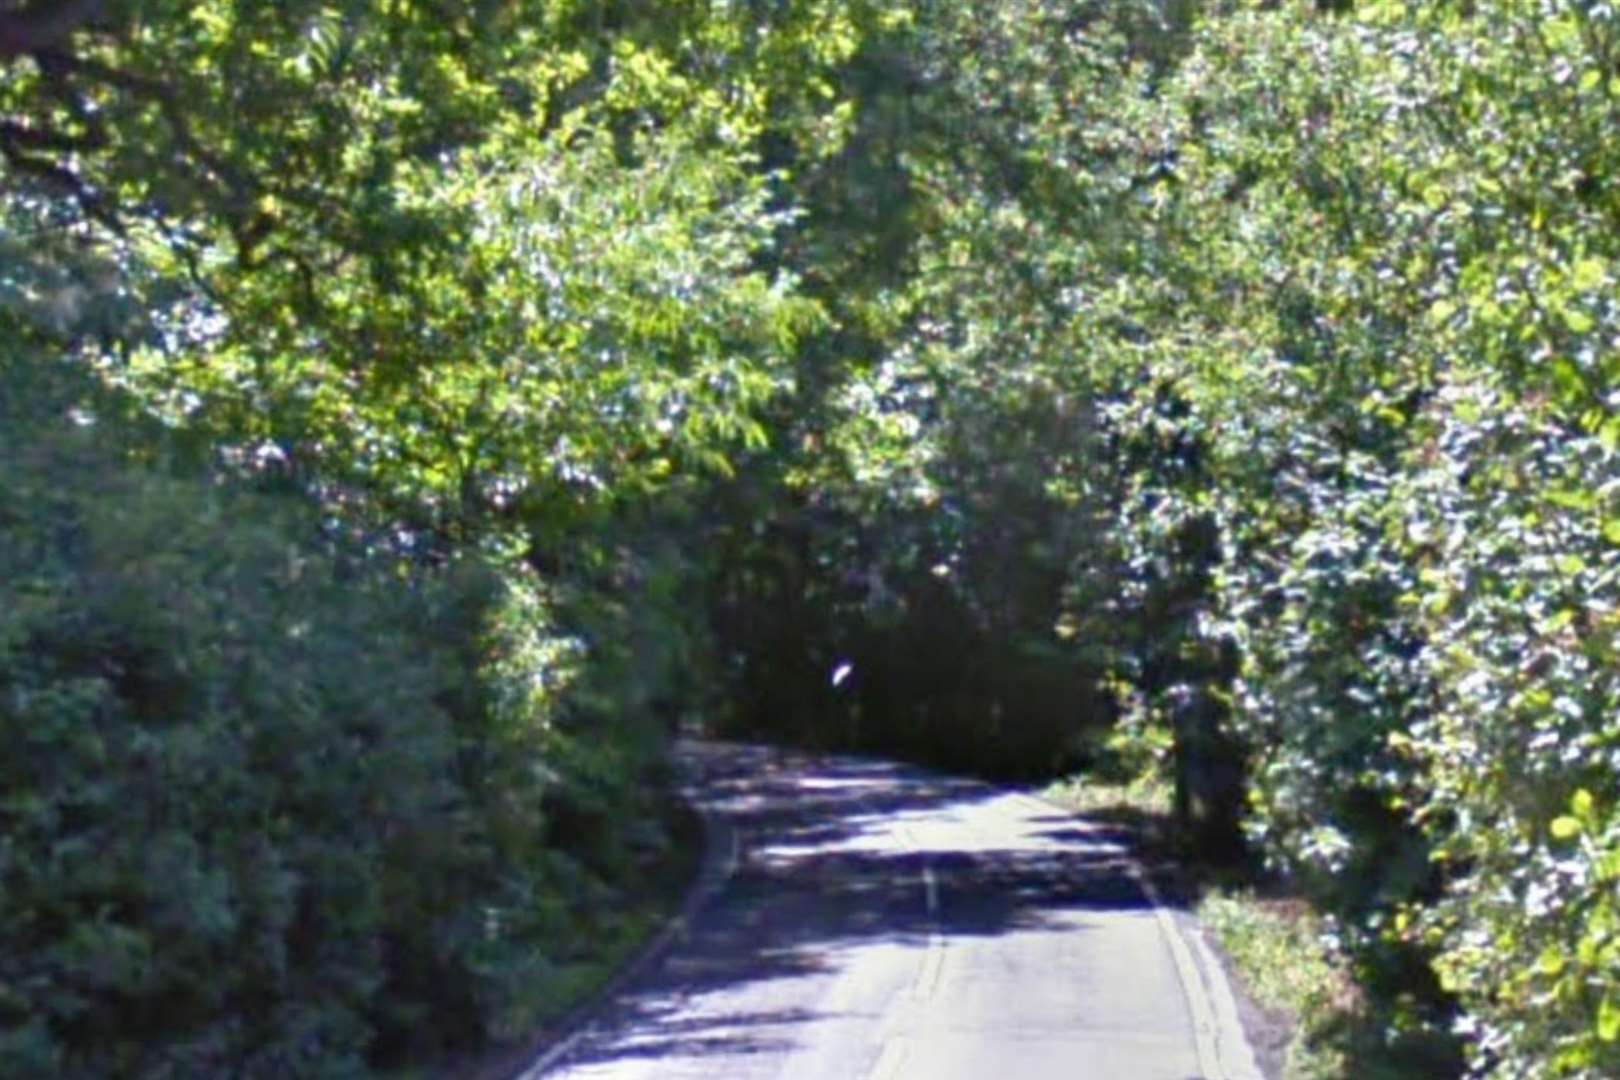 A woman and two children have been injured after a car collided with a tree on Thornden Wood Road, Whitstable. Picture: Google